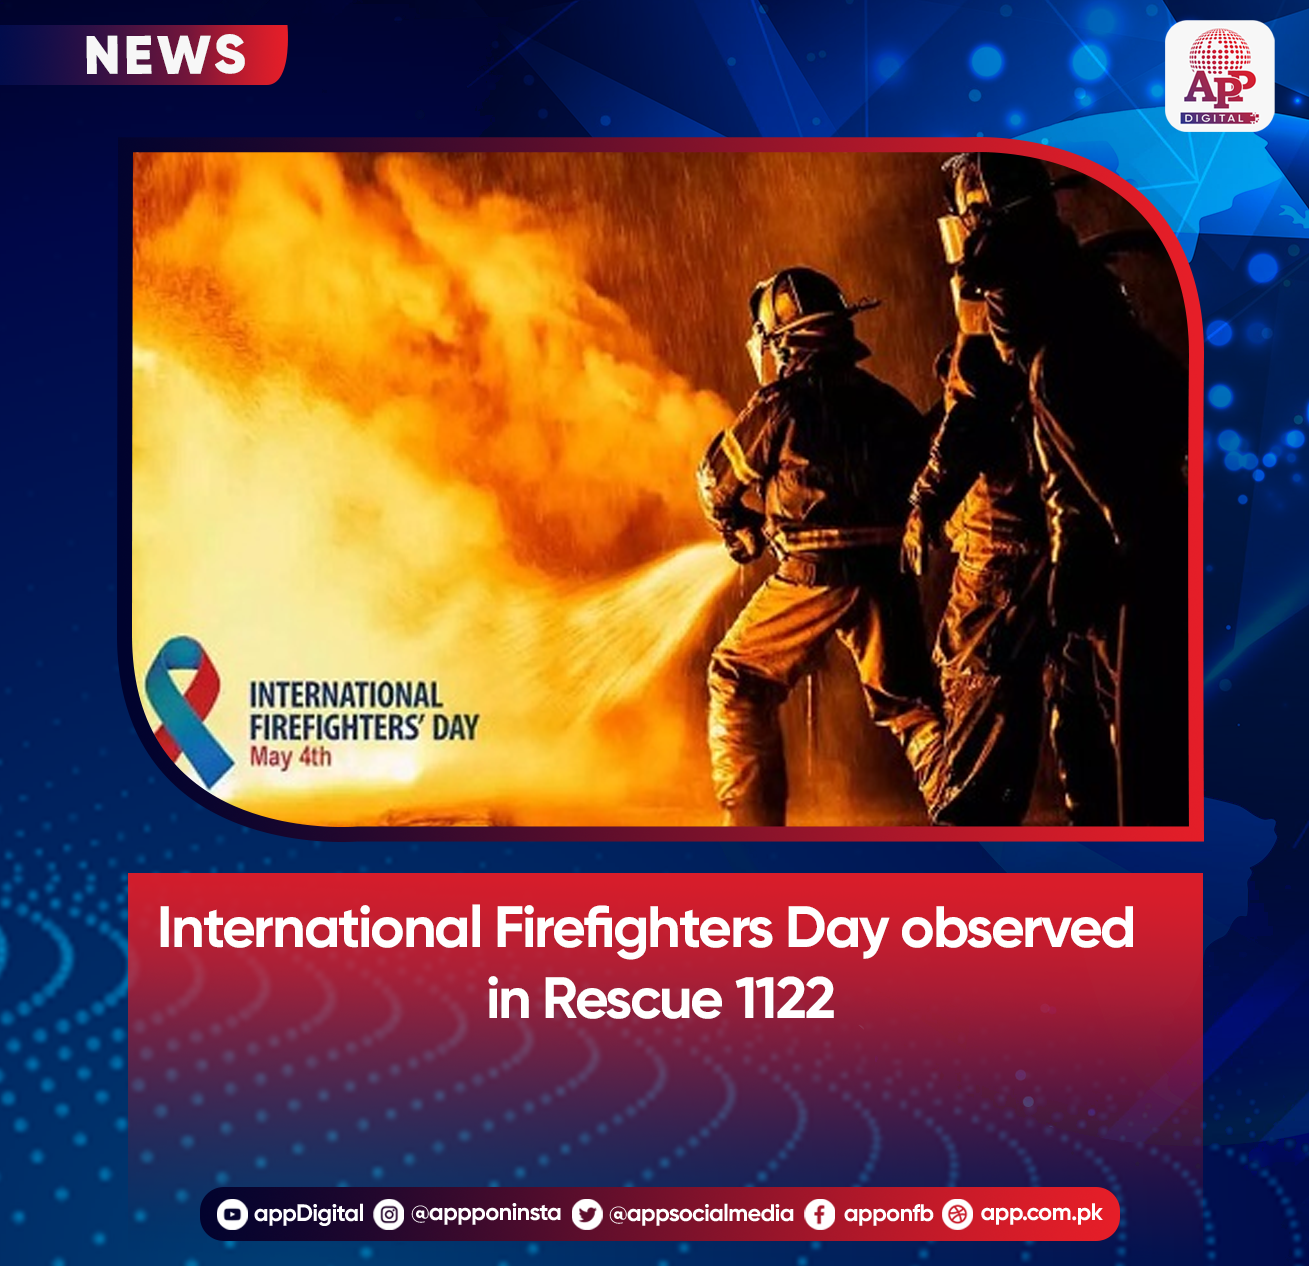 International Firefighters Day observed in Rescue 1122